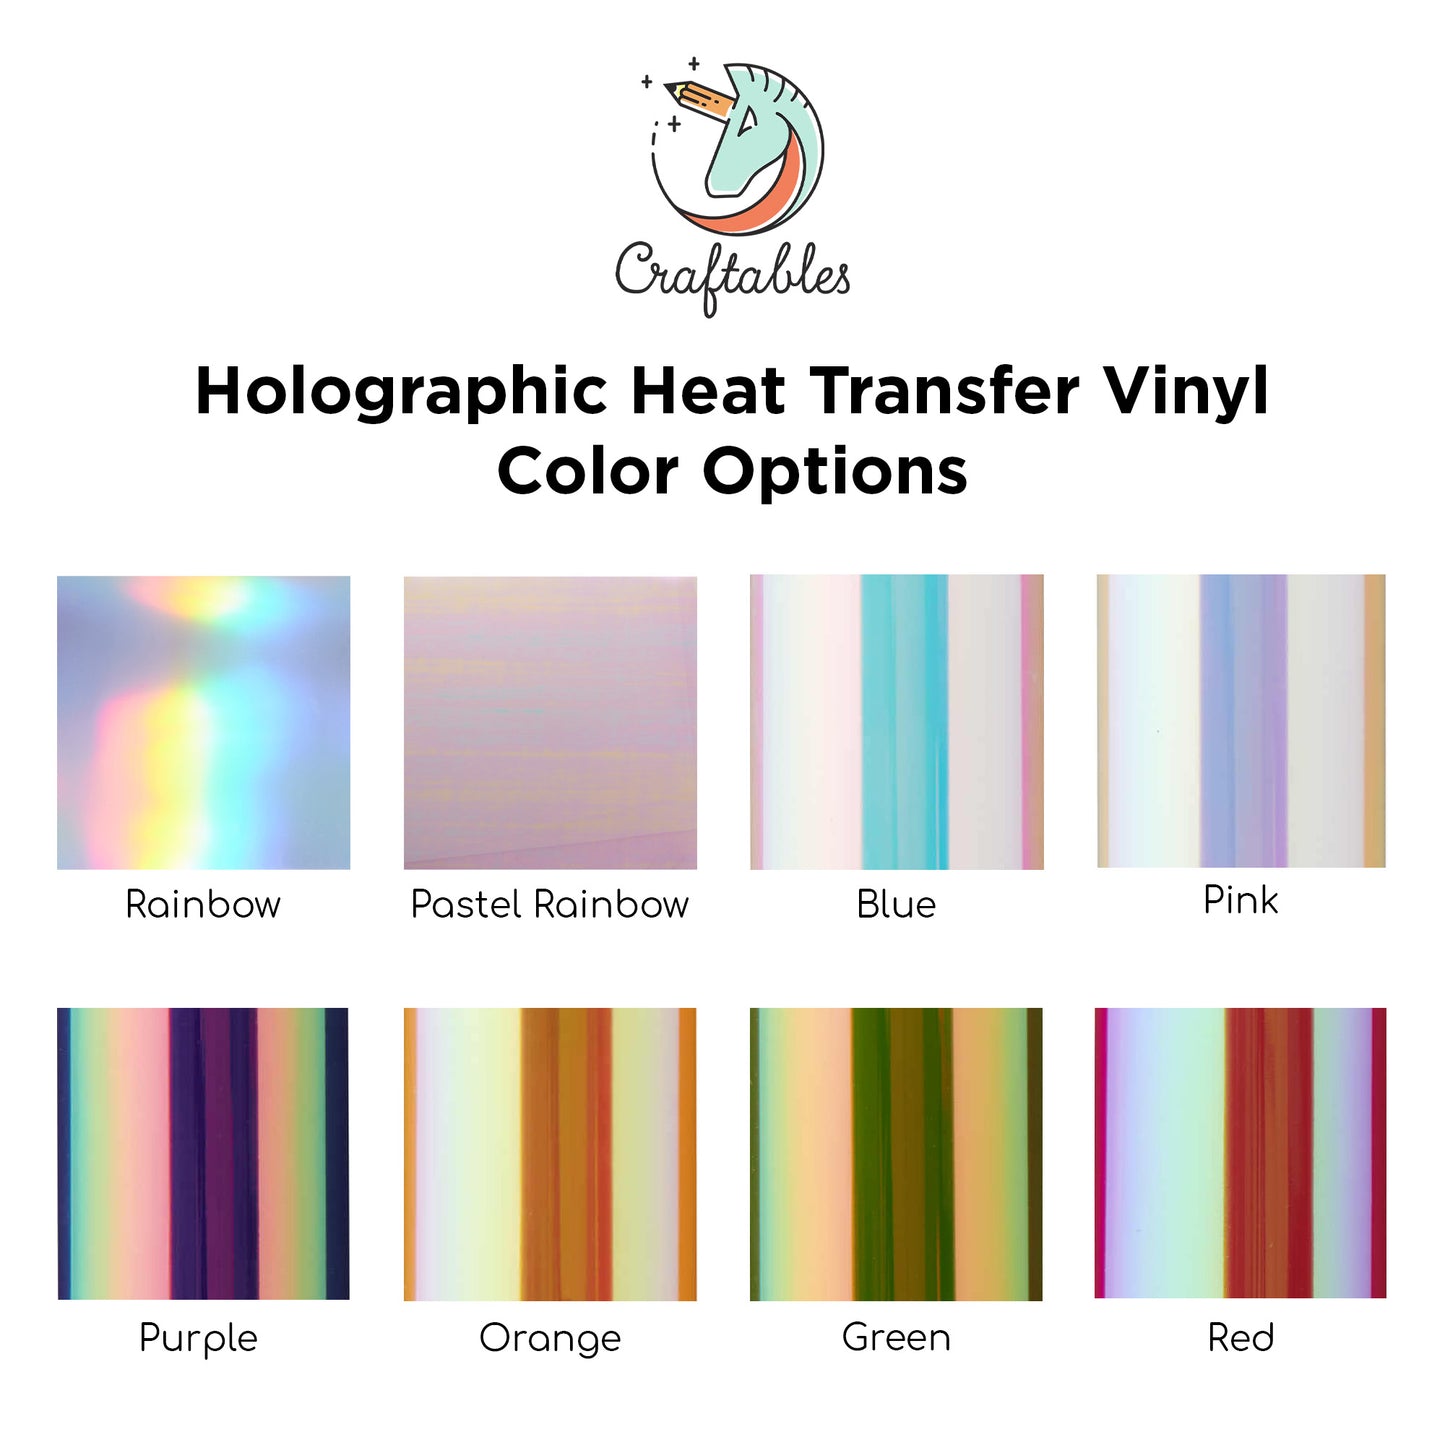 Blue Holographic Heat Transfer Vinyl Sheets By Craftables